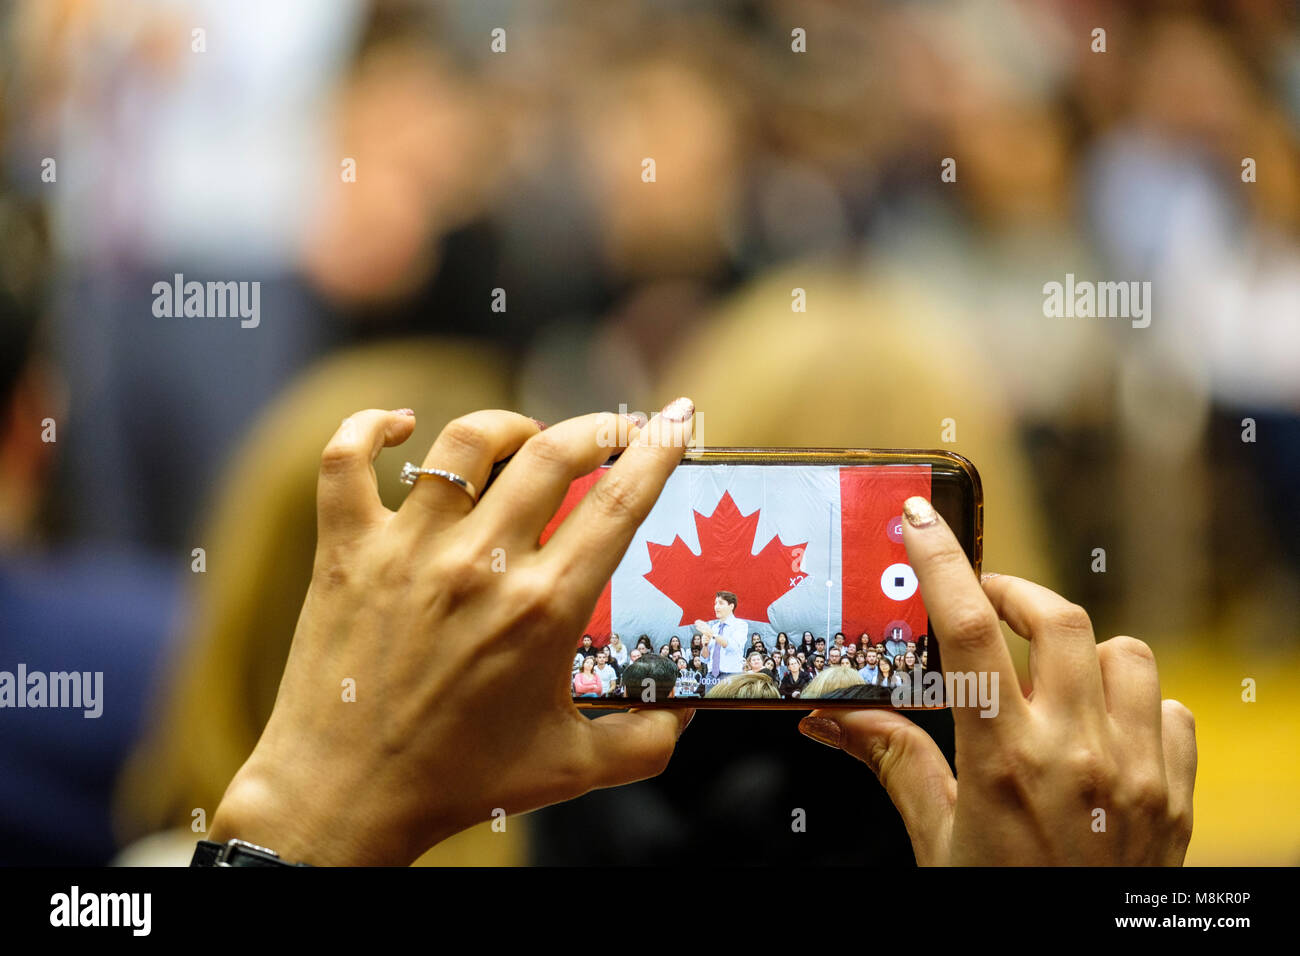 Hands of a woman holding a cell phone taking a picture of Justin Trudeau, Prime Minister of Canada, at a town hall meeting in London, Ontario, Canada. Stock Photo